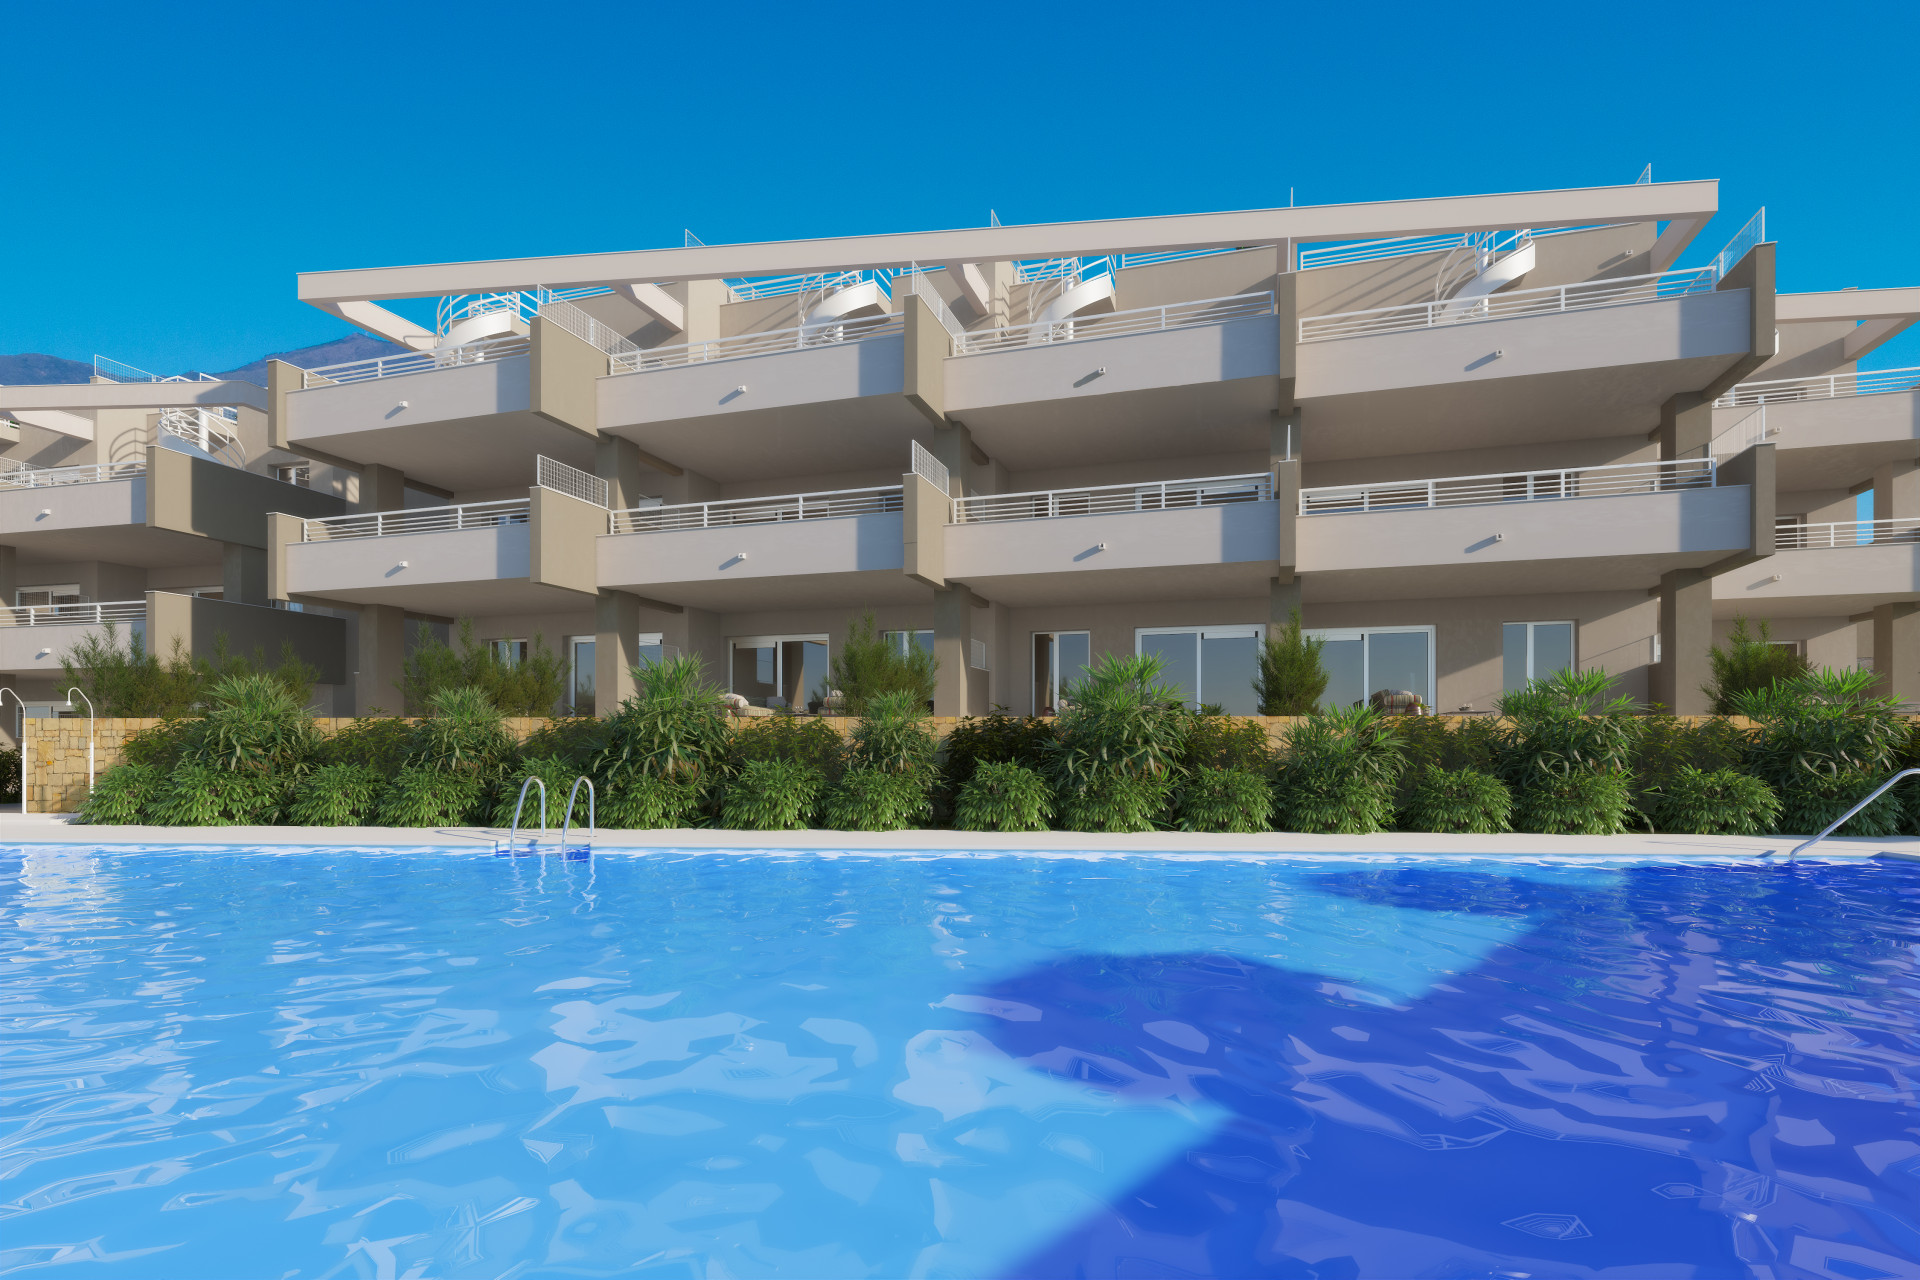 Two bedroom apartment with large terrace on the first line of Estepona Golf course.